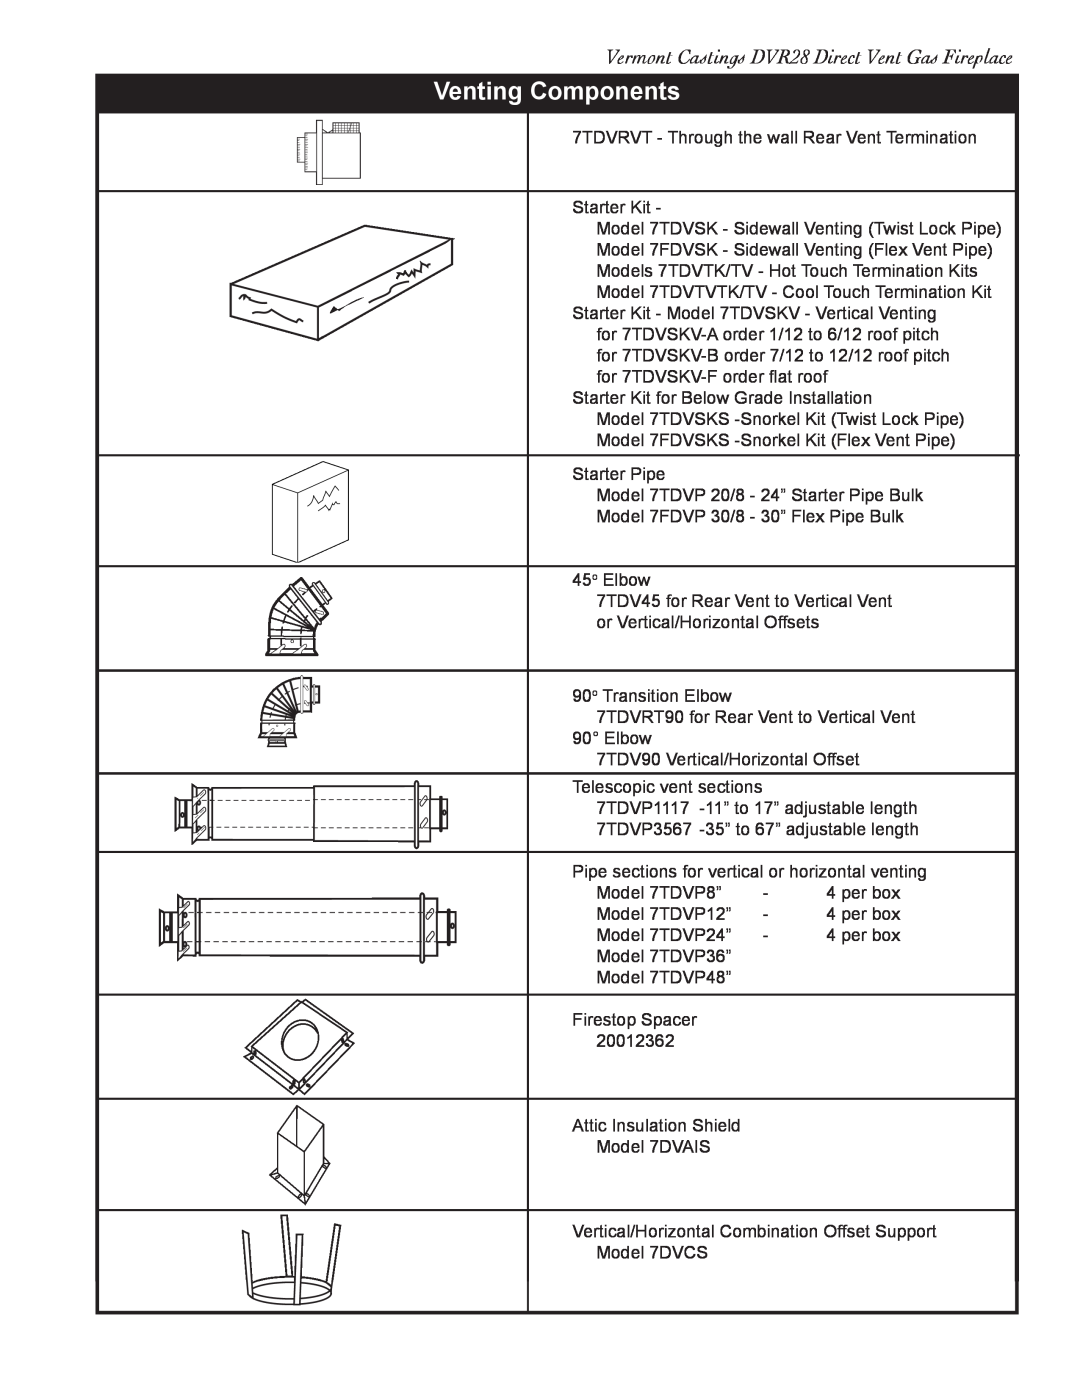 Vermont Casting DVR28IN installation instructions Venting Components, Vermont Castings DVR28 Direct Vent Gas Fireplace 